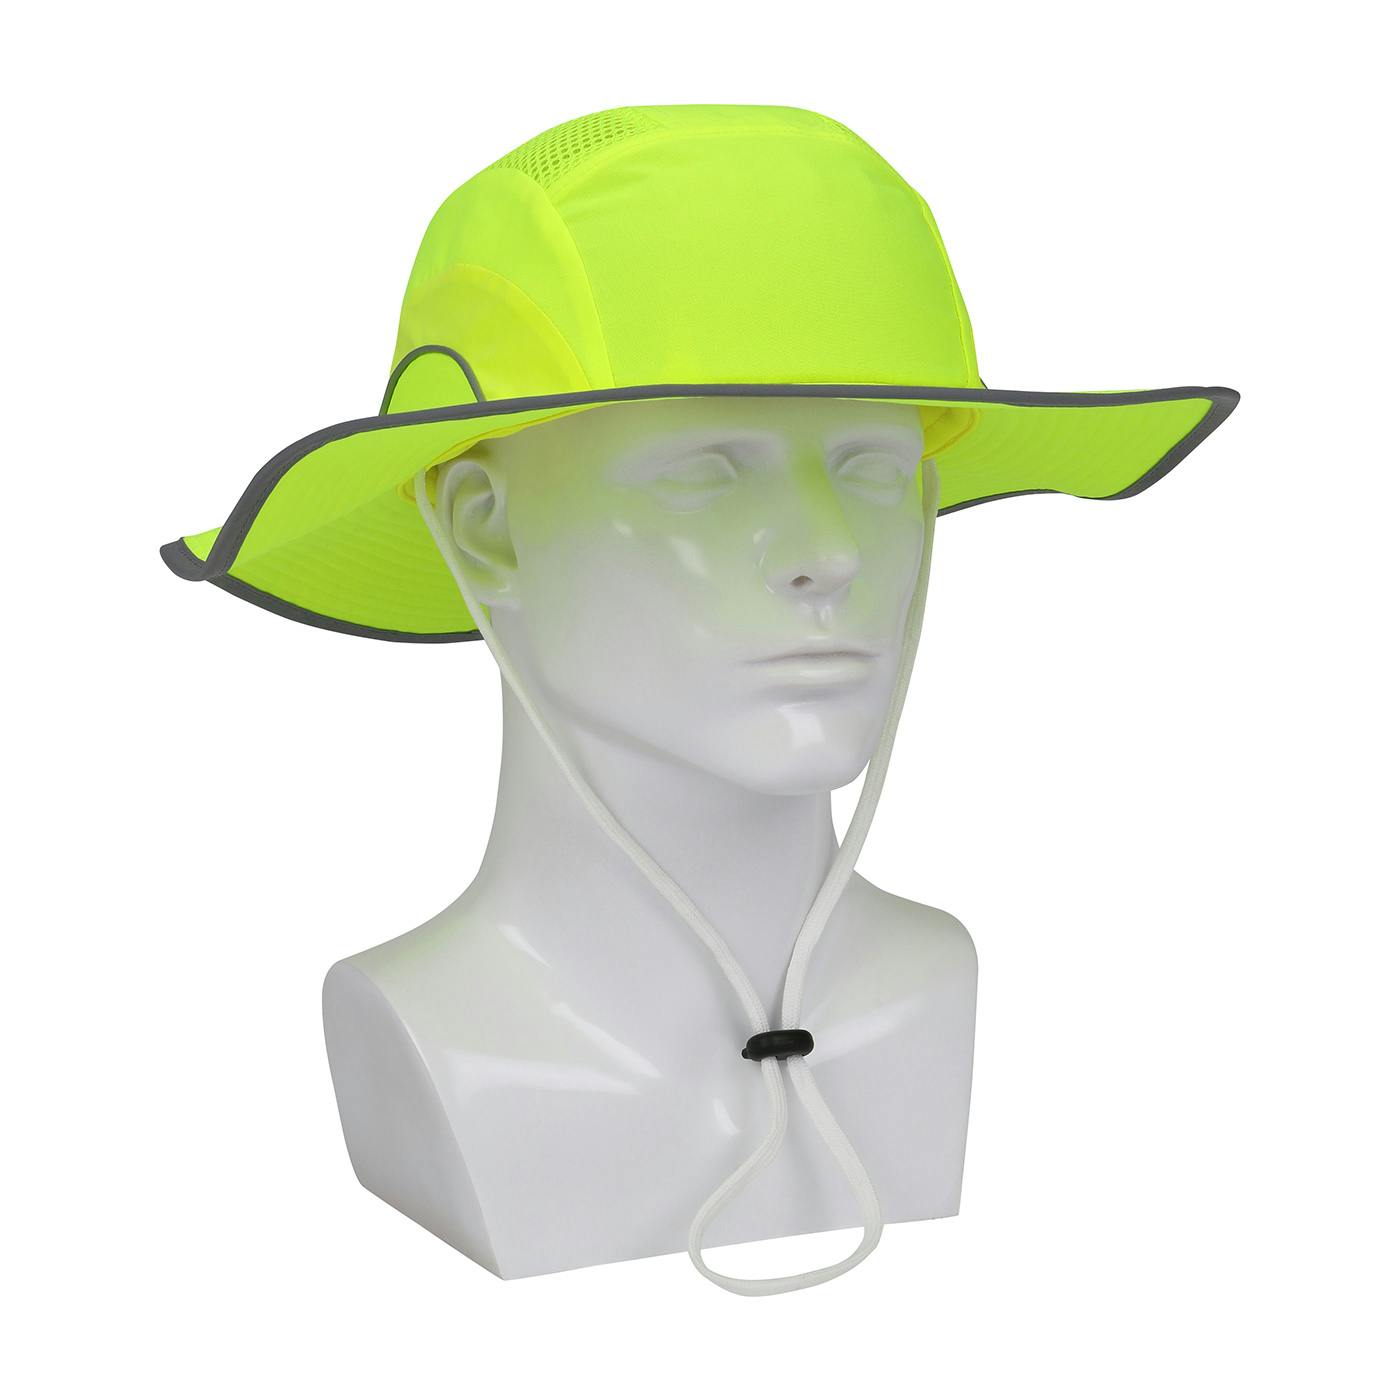 Hi-Vis Ranger Style Bump Cap with HDPE Protective Liner, Adjustable Back and Chin Strap, Hi-Vis Yellow (282-AFB375-LY) - OS_1